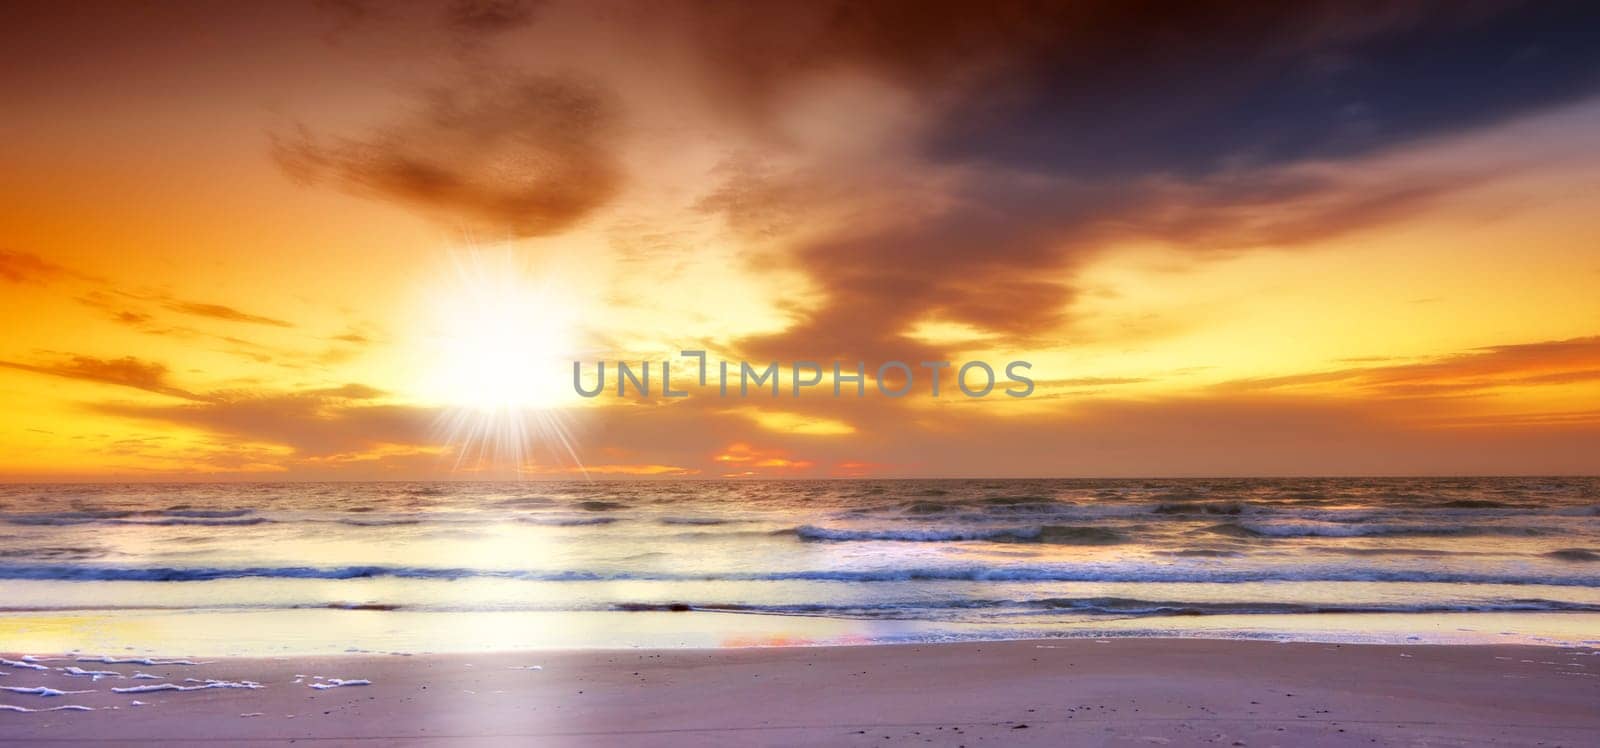 Sky, sunset and sea at morning on the horizon with ocean and water waves landscape. Sunrise, calm weather and summer by the beach with coastline and outdoor environment with the sun in nature by YuriArcurs